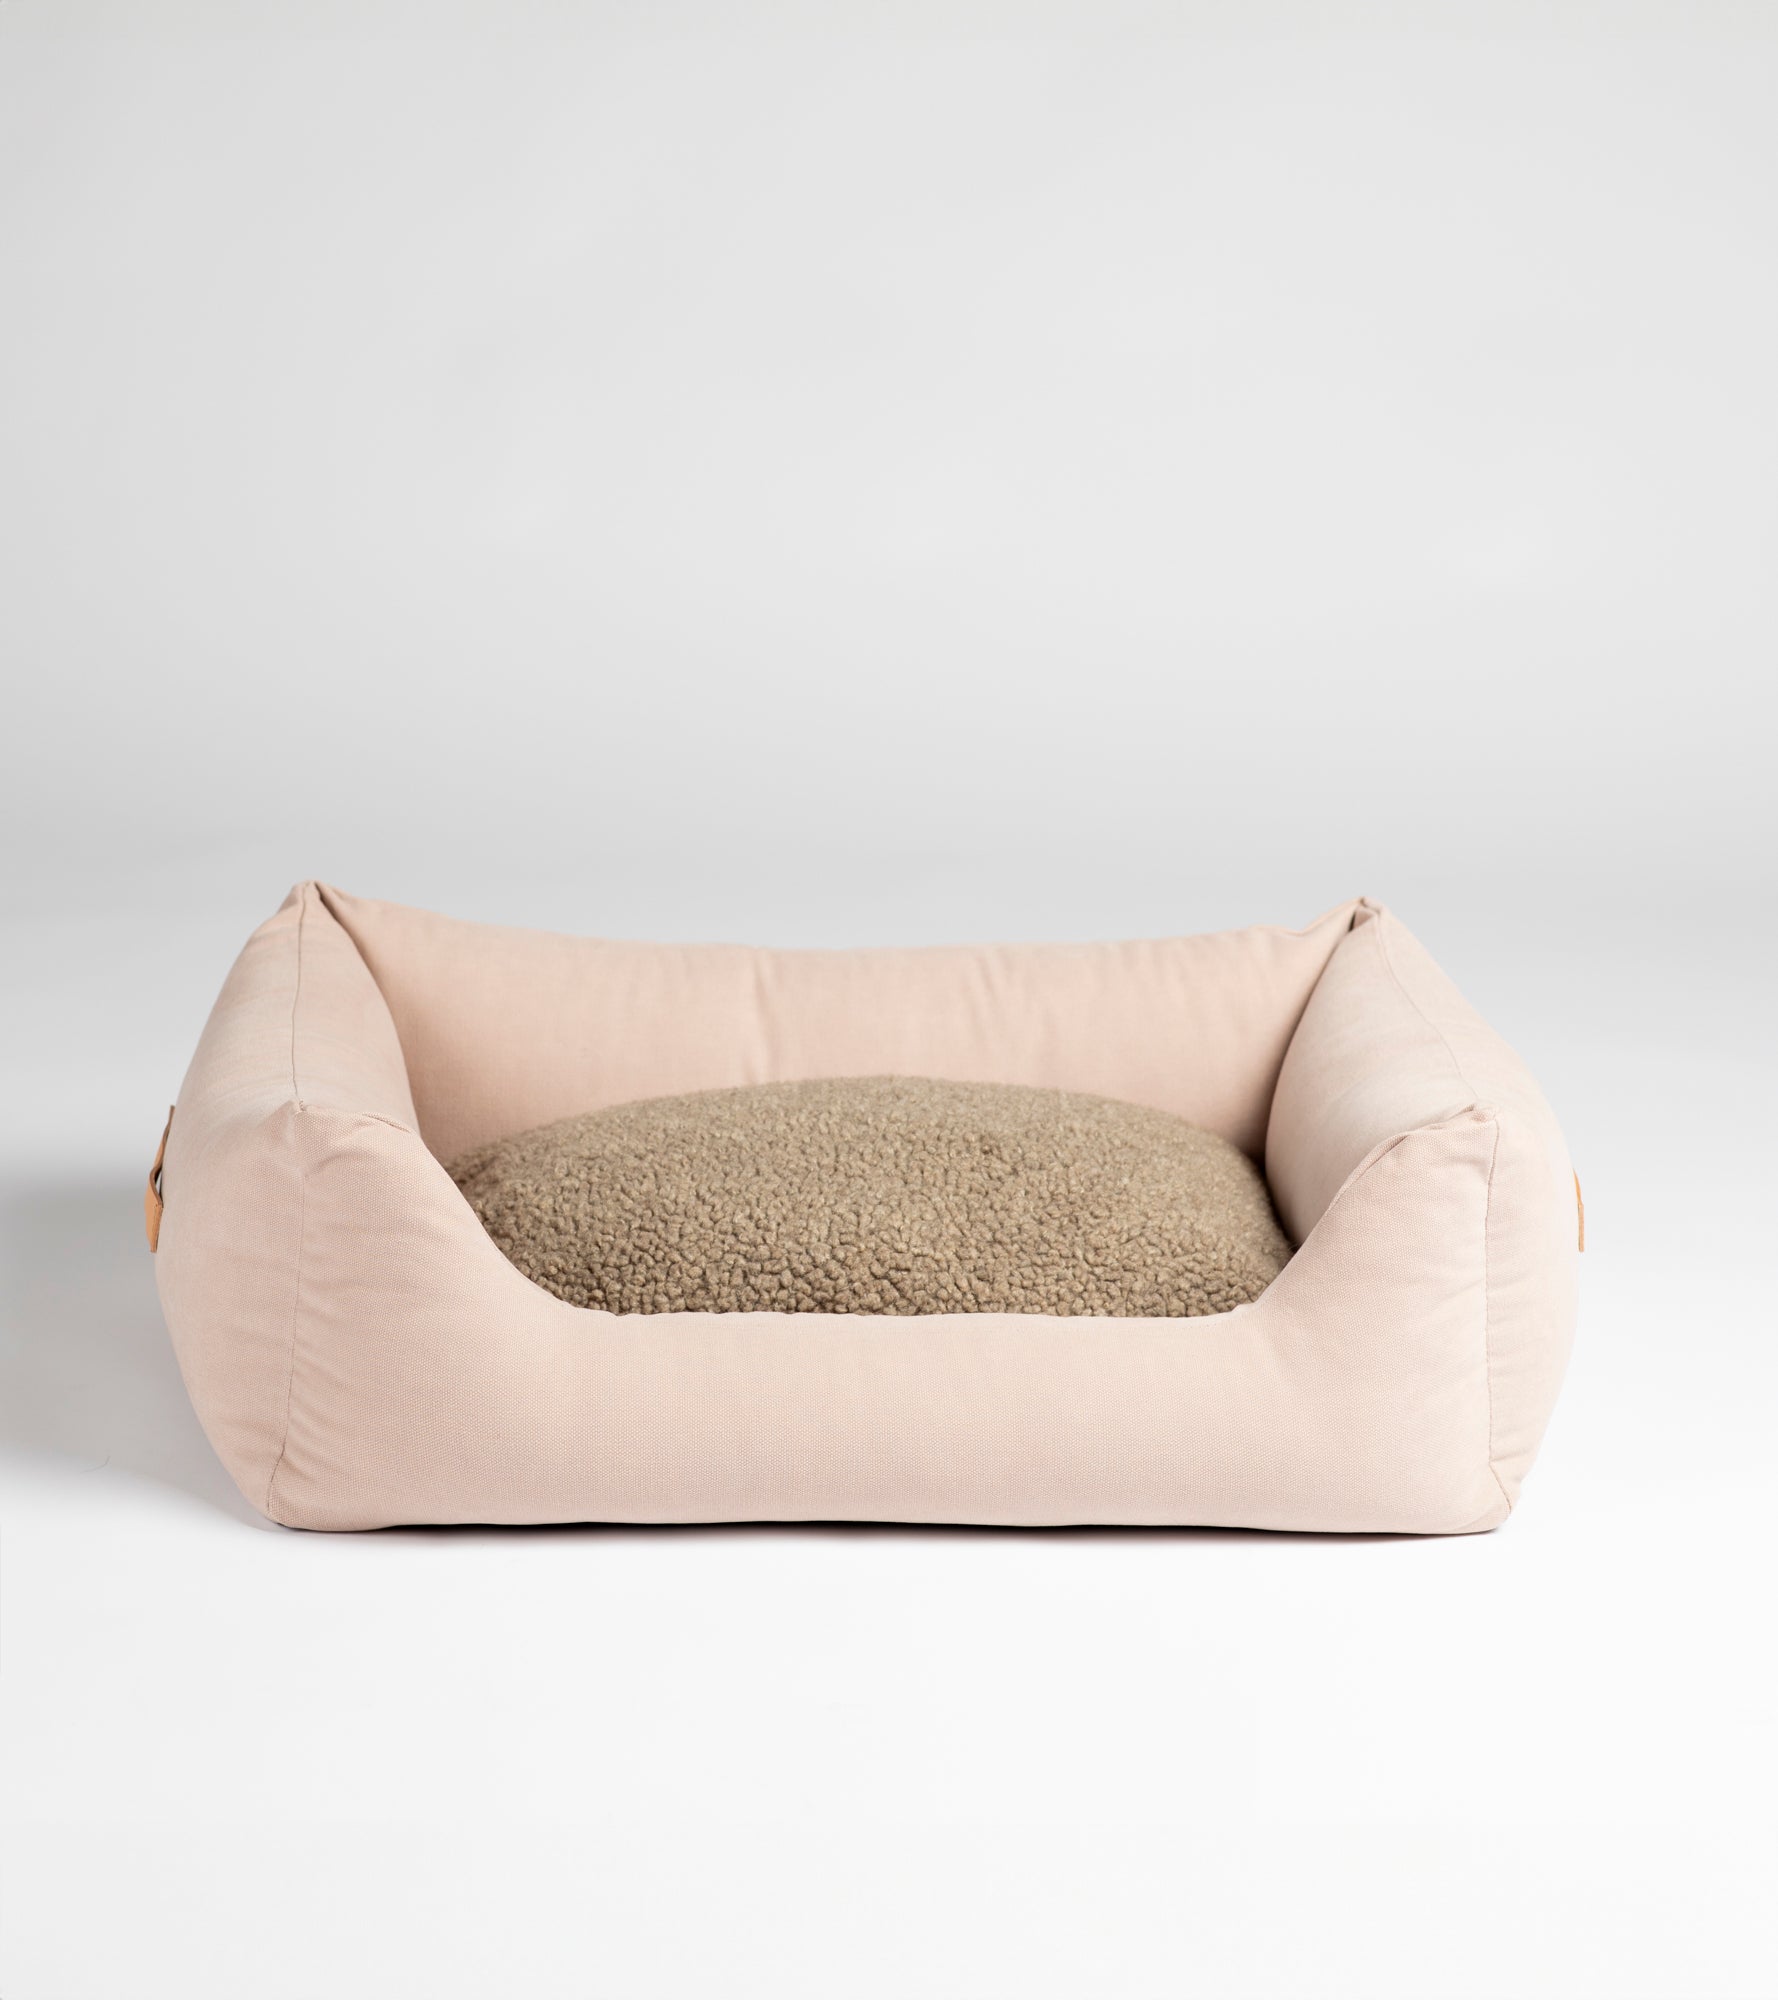 cotton-pink-dogbed.jpg